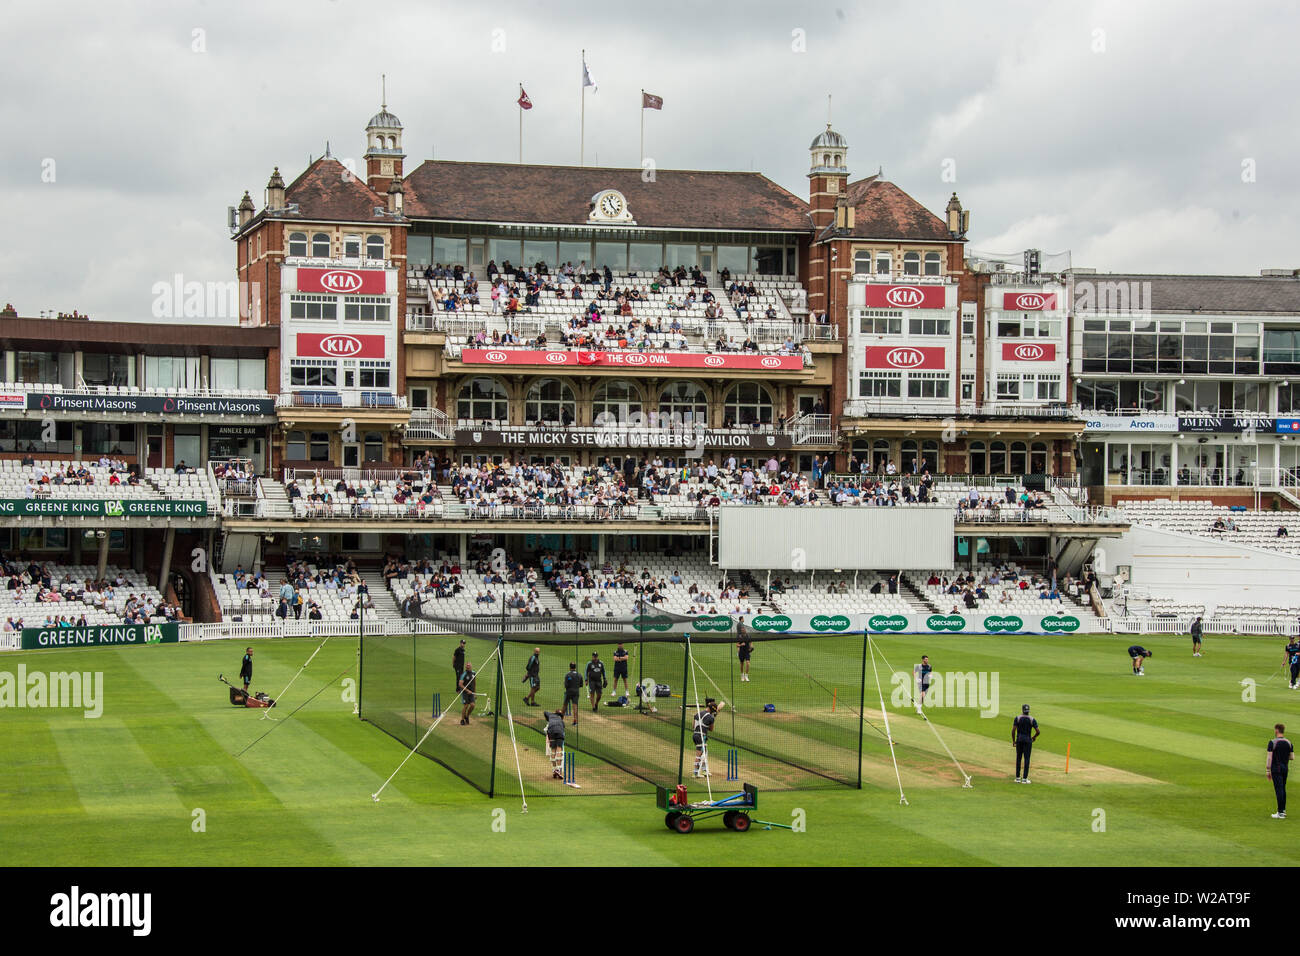 London, UK. 7 July, 2019. The players warm up infront of the Micky Stewart Members' Pavilion ahead of the first day of the Specsavers County Championship game between Surrey and Kent at the Kia Oval. David Rowe/Alamy Live News Stock Photo